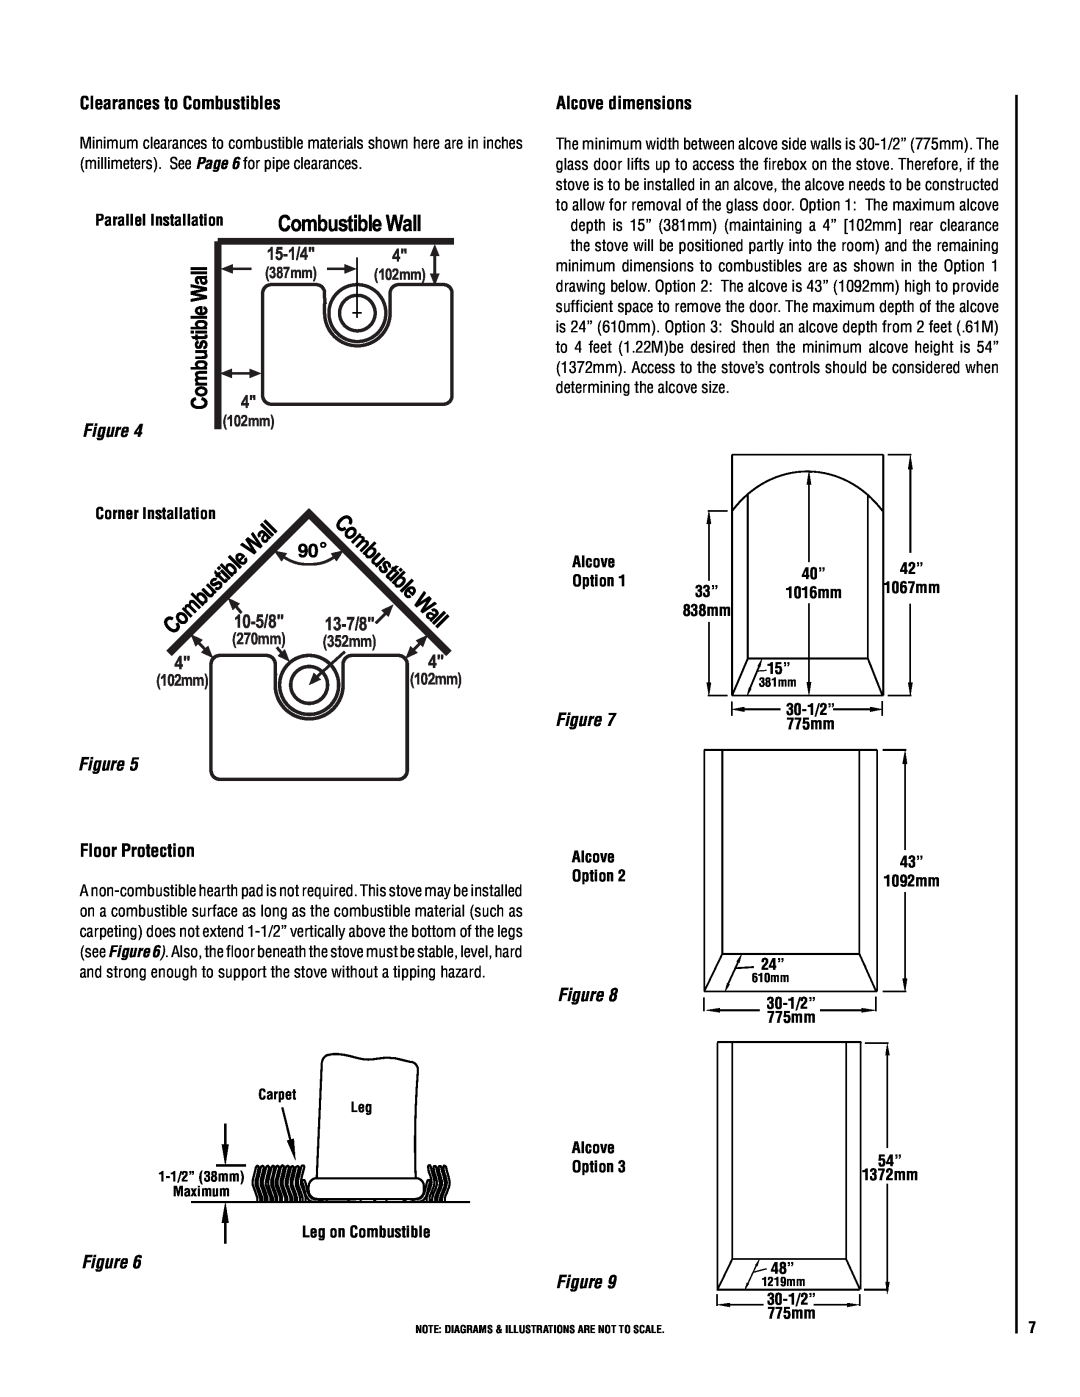 Lennox Hearth VIN Combustible Wall, 15-1/4, 10-5/8, 13-7/8, Clearances to Combustibles, Alcove dimensions, 387mm 